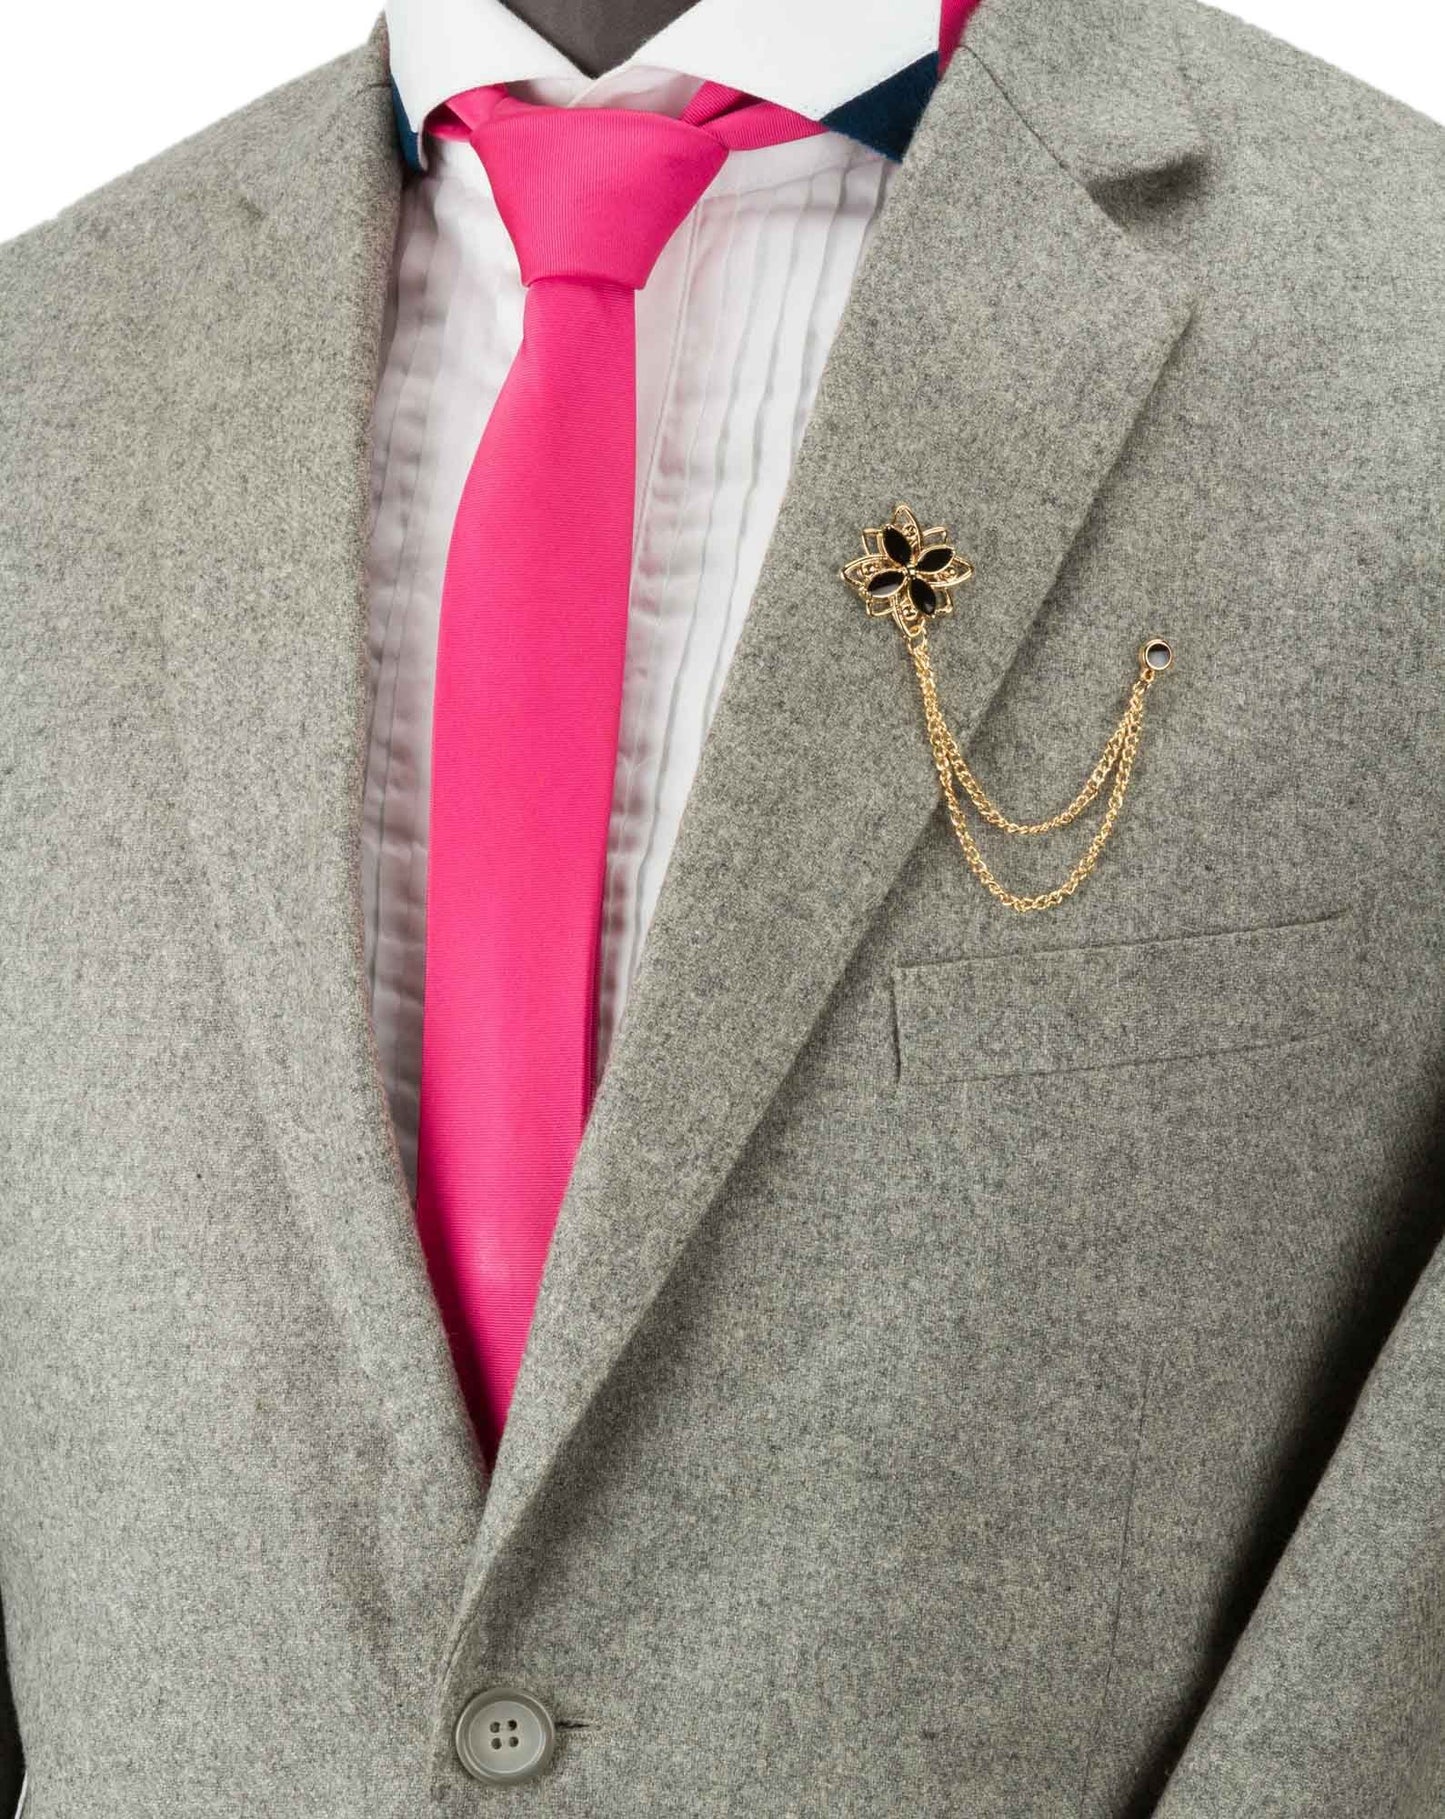 Knighthood Spiral Star with Hanging Chain Badge Coat Suit Wedding Gift Party Shirt Collar Accessories Brooch for Men Golden